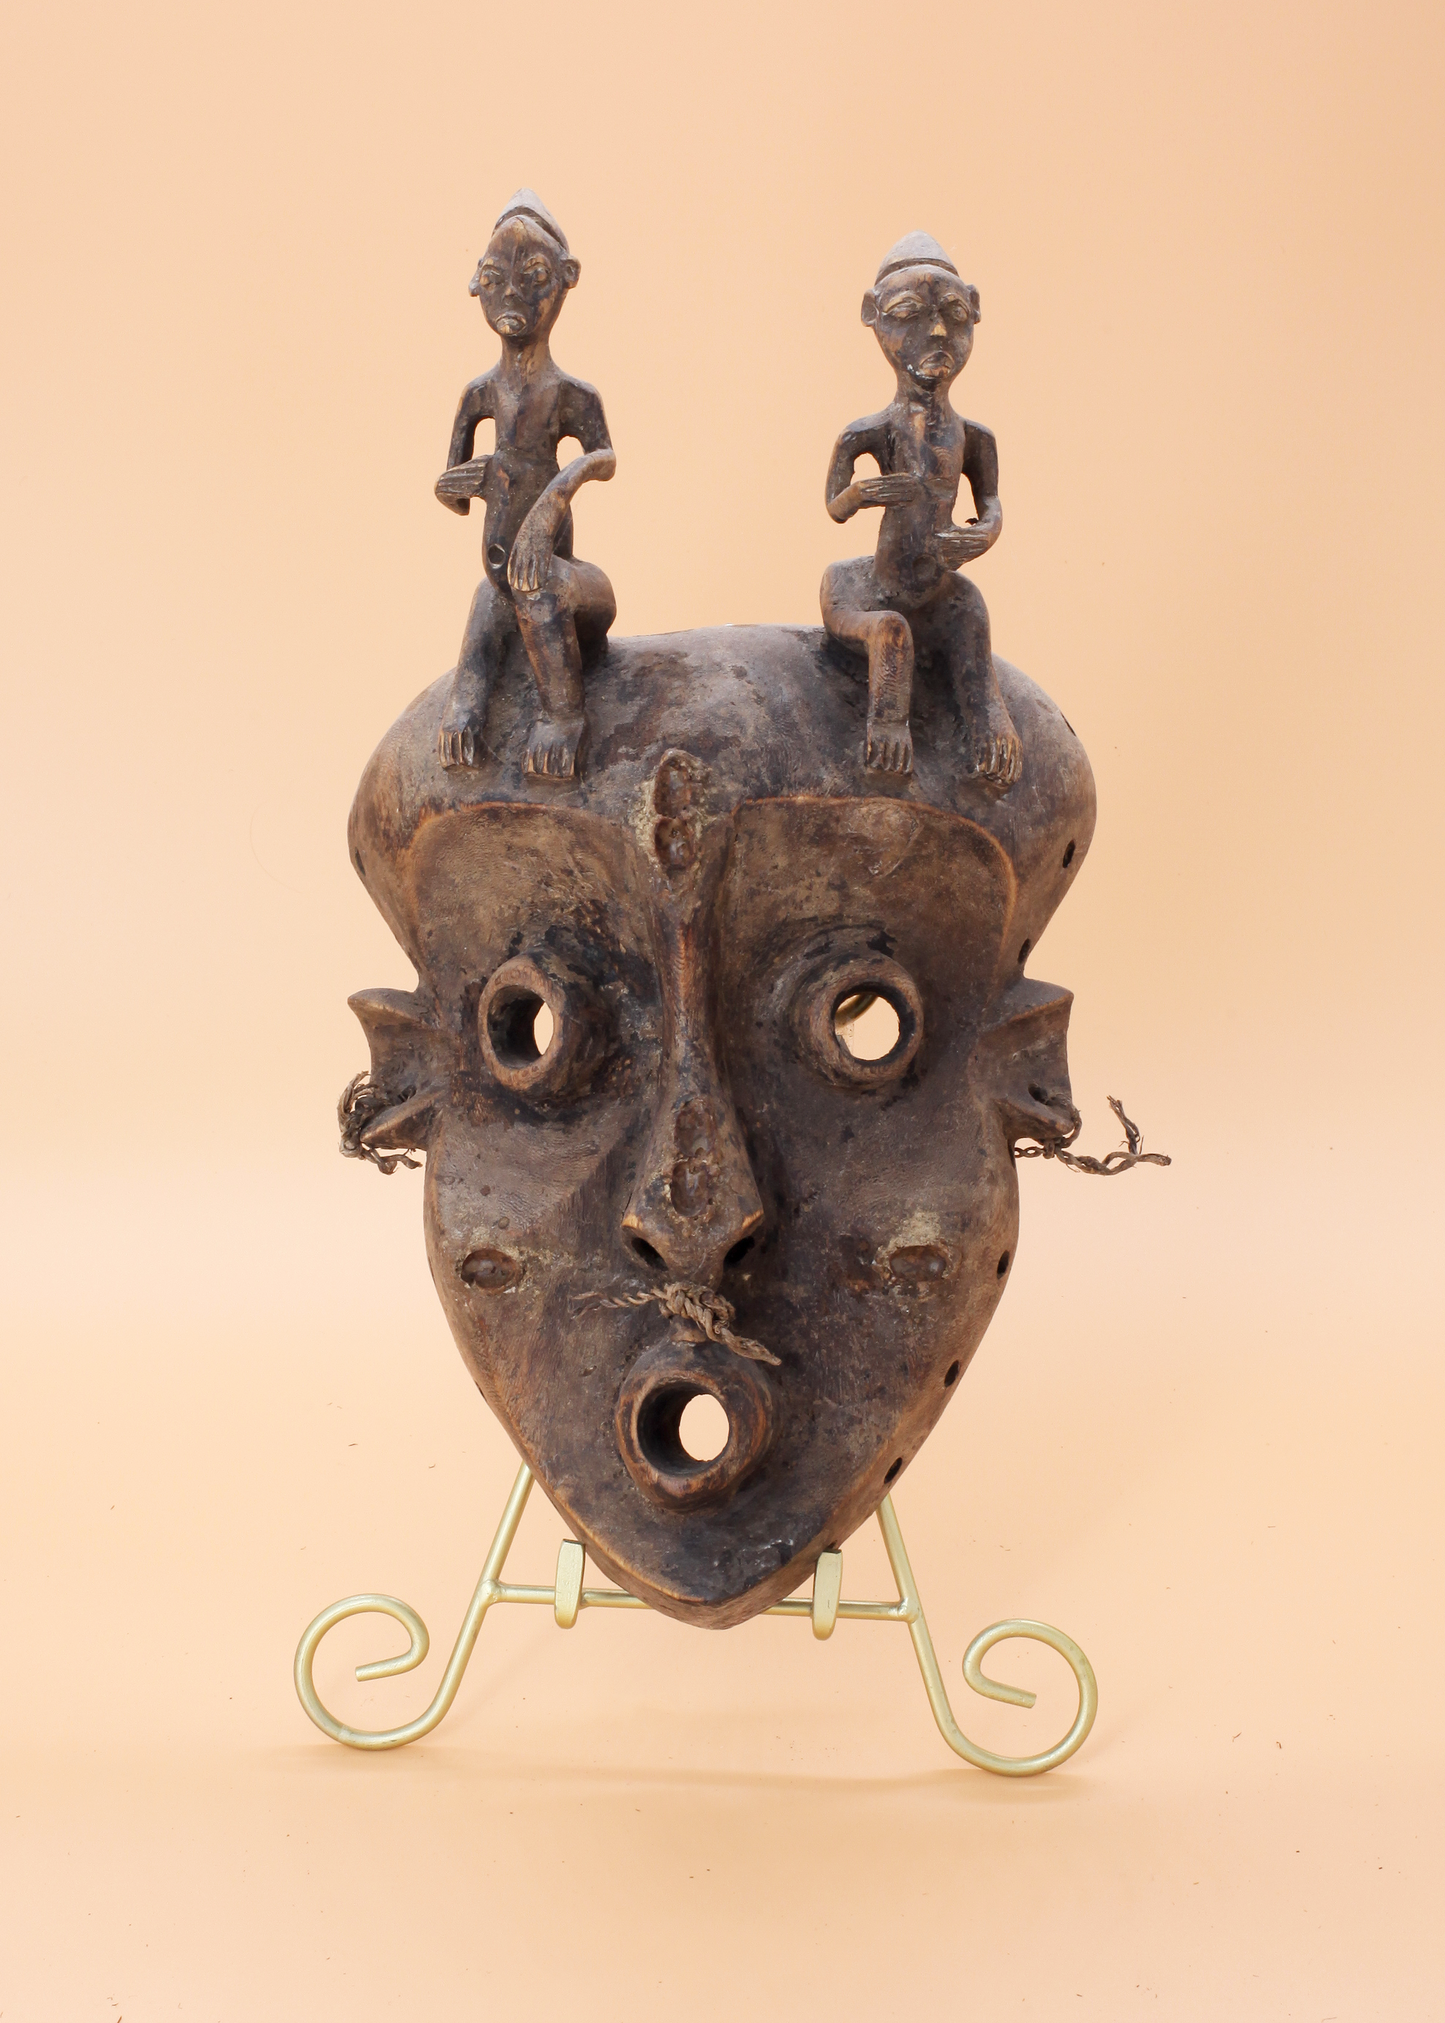 Early 20th Century Pende "Circumcision Ceremonial" Mask